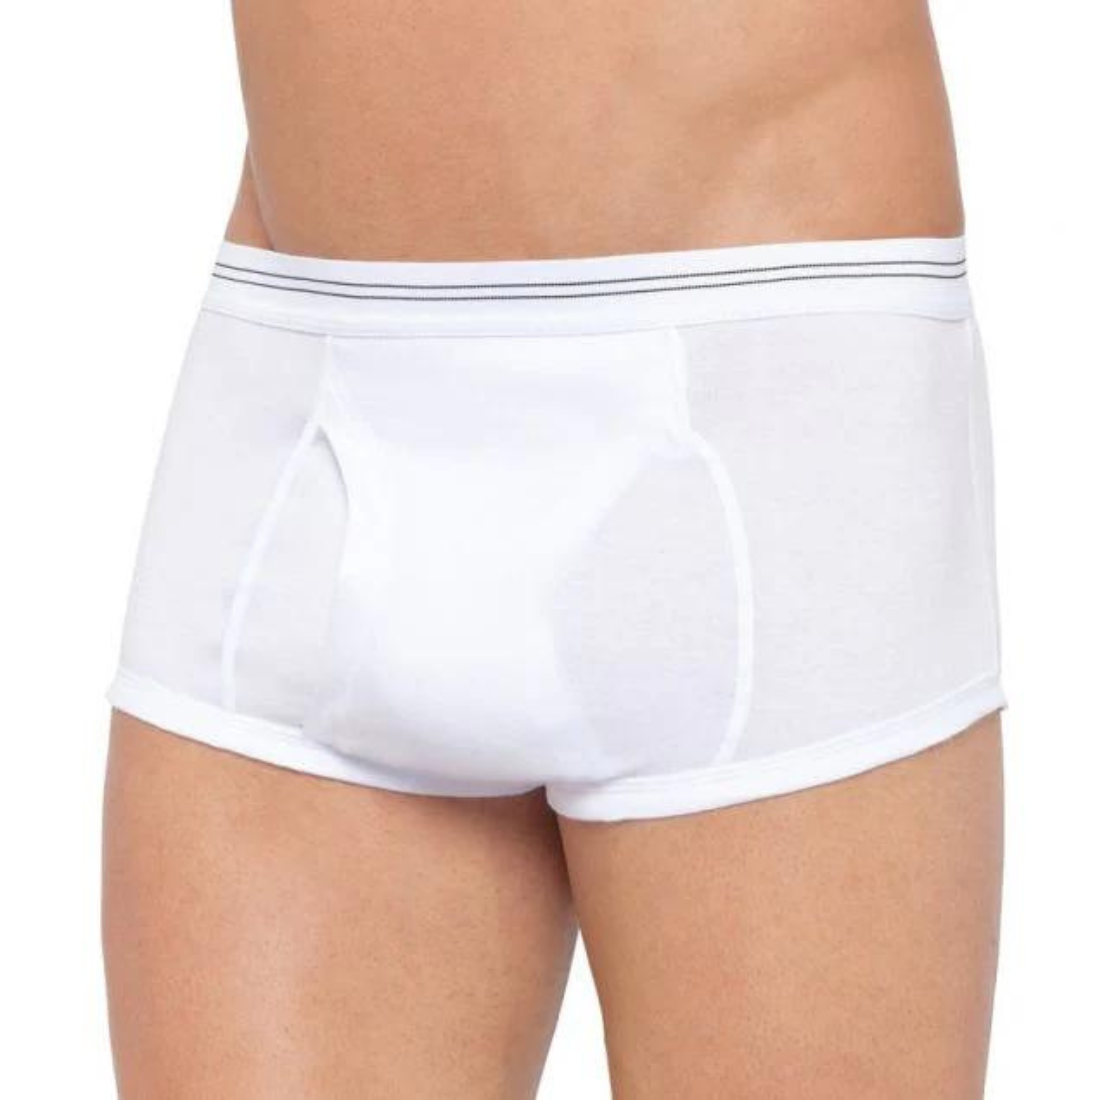 Bells Double Seat Brief 100 White Mens Underwear by Holeproof | The Bloke Shop